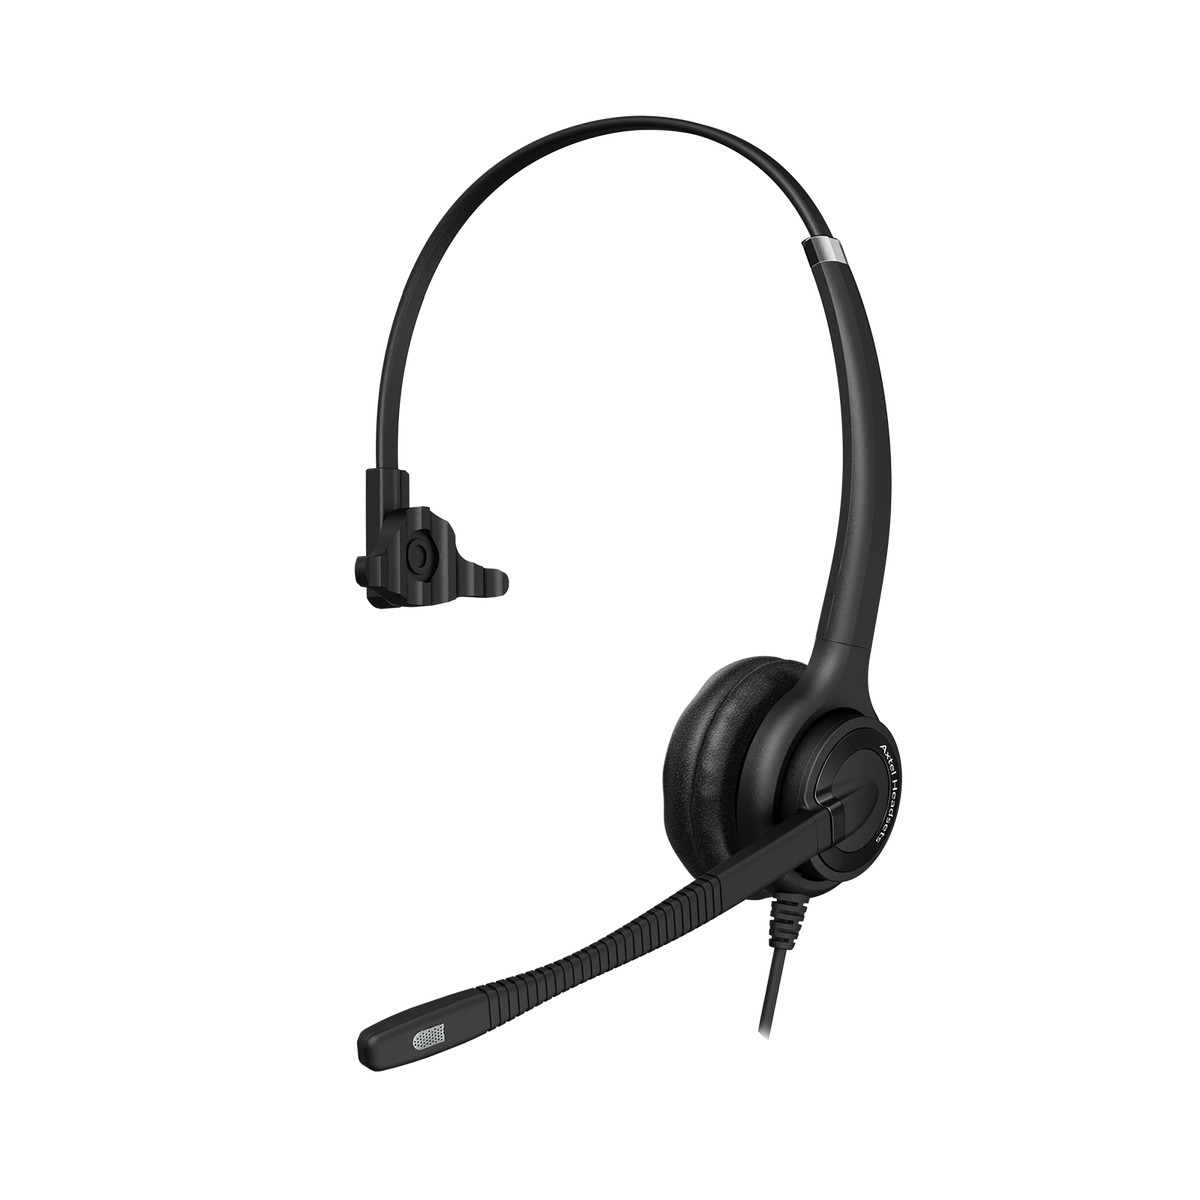 AXTEL-AXH-EHDM-HEADSET-RIGHT-SIDE